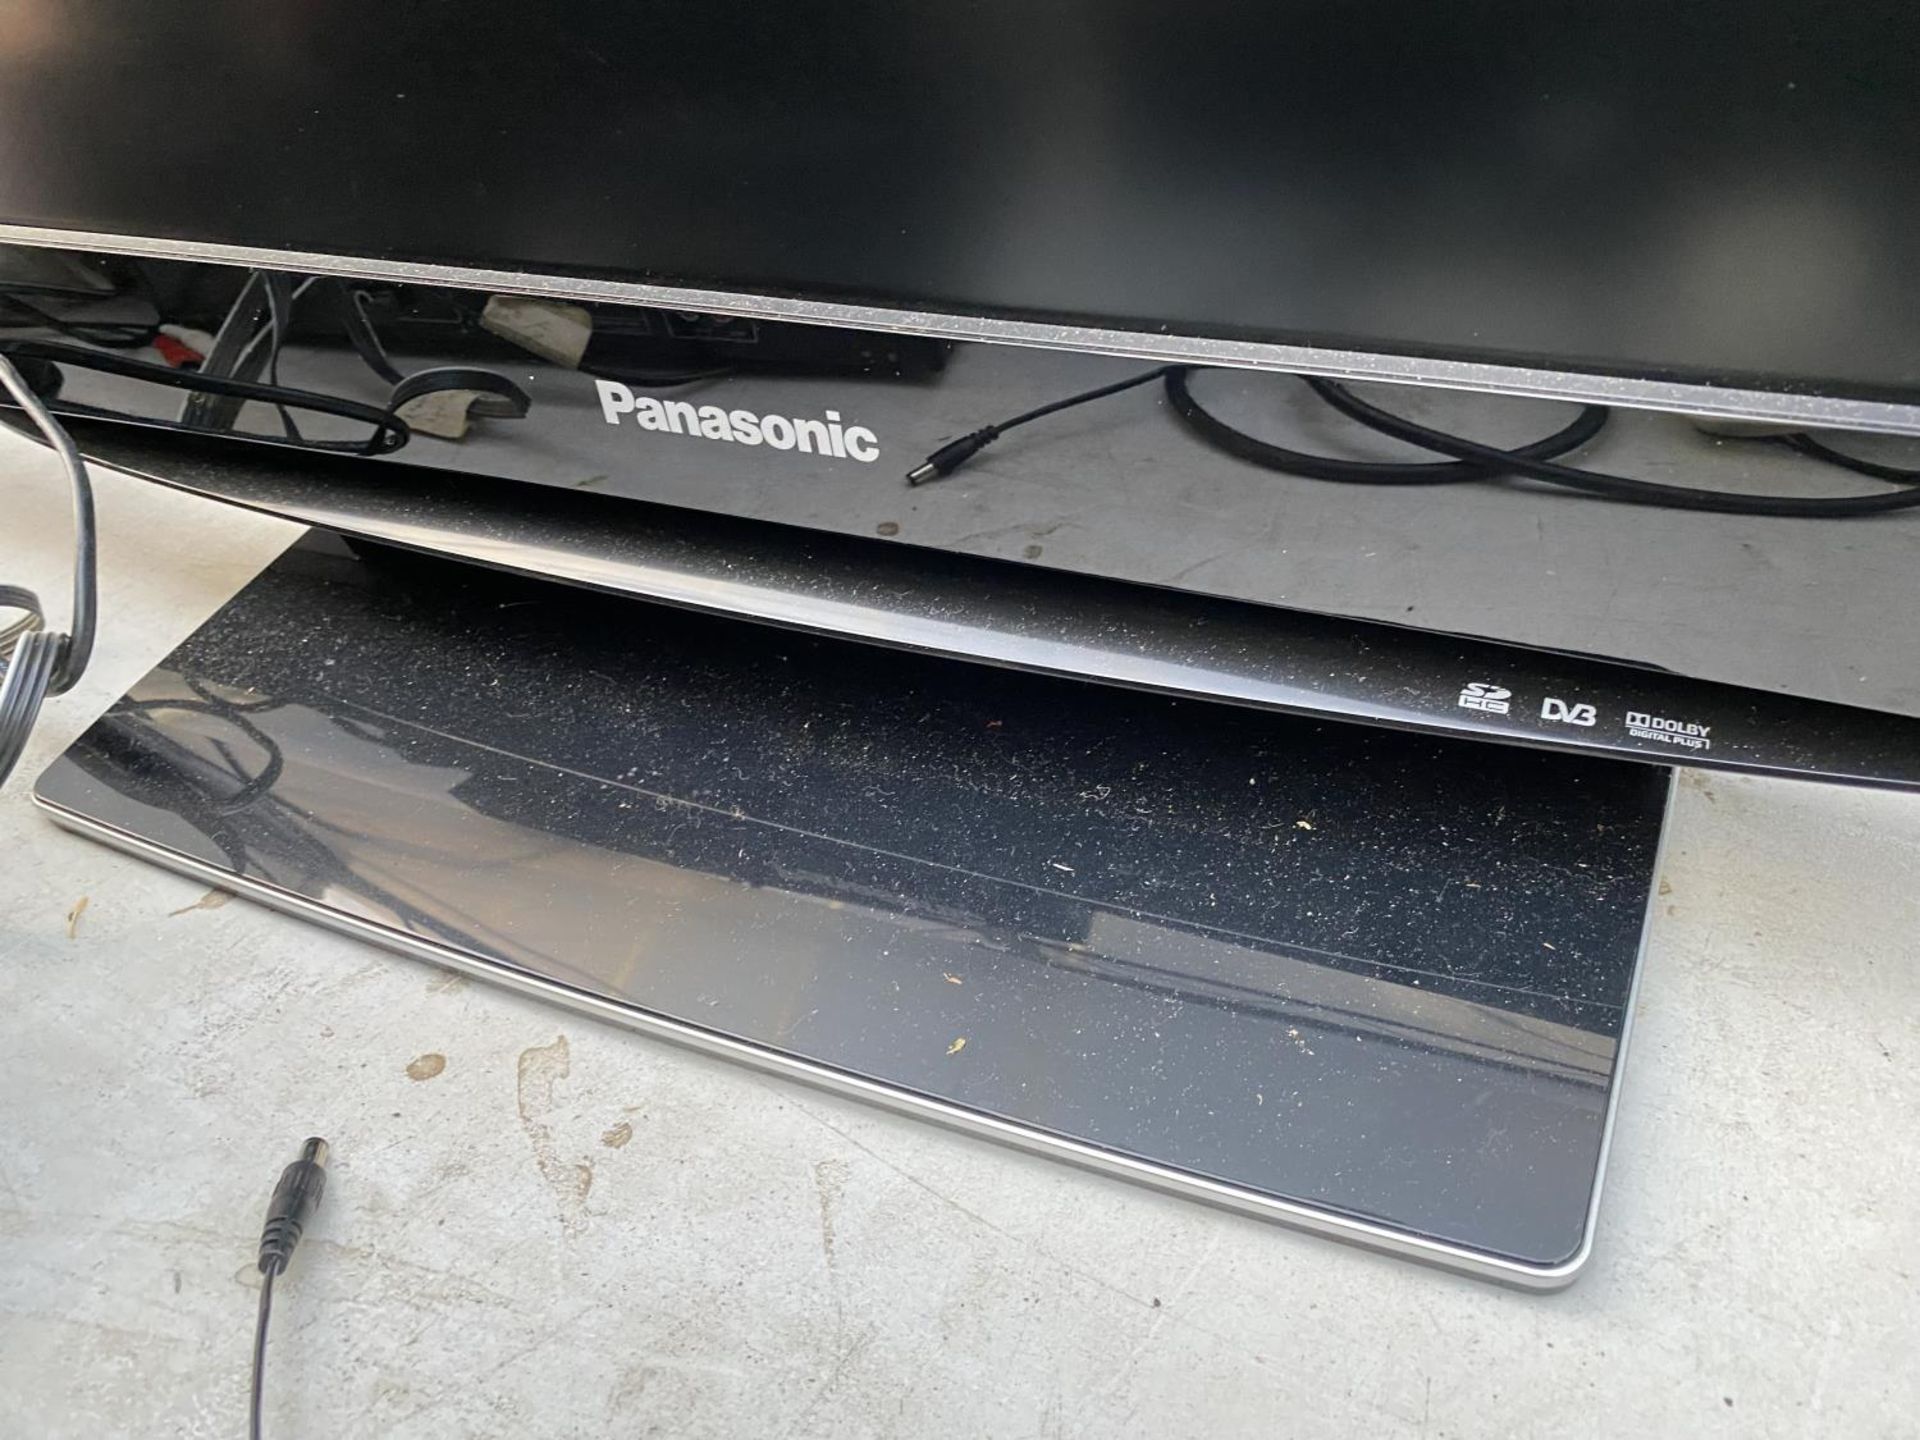 A PANASONIC 37" TELEVISION WITH REMOTE CONTROL - Image 2 of 2